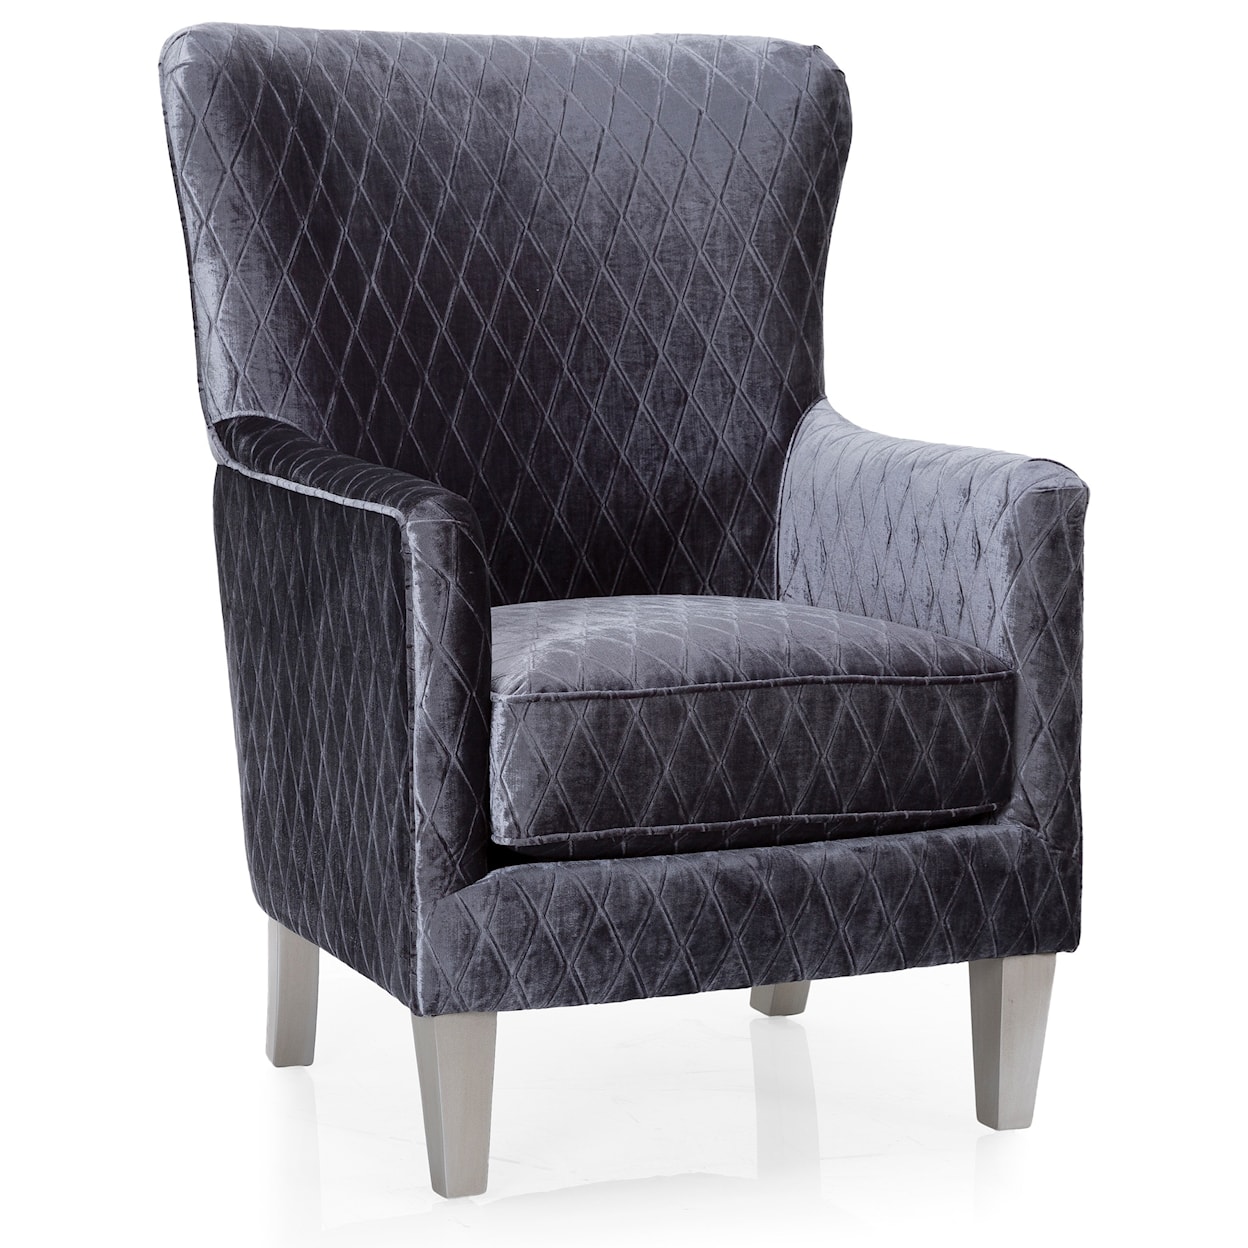 Decor-Rest 2379 Contemporary Wing Back Chair